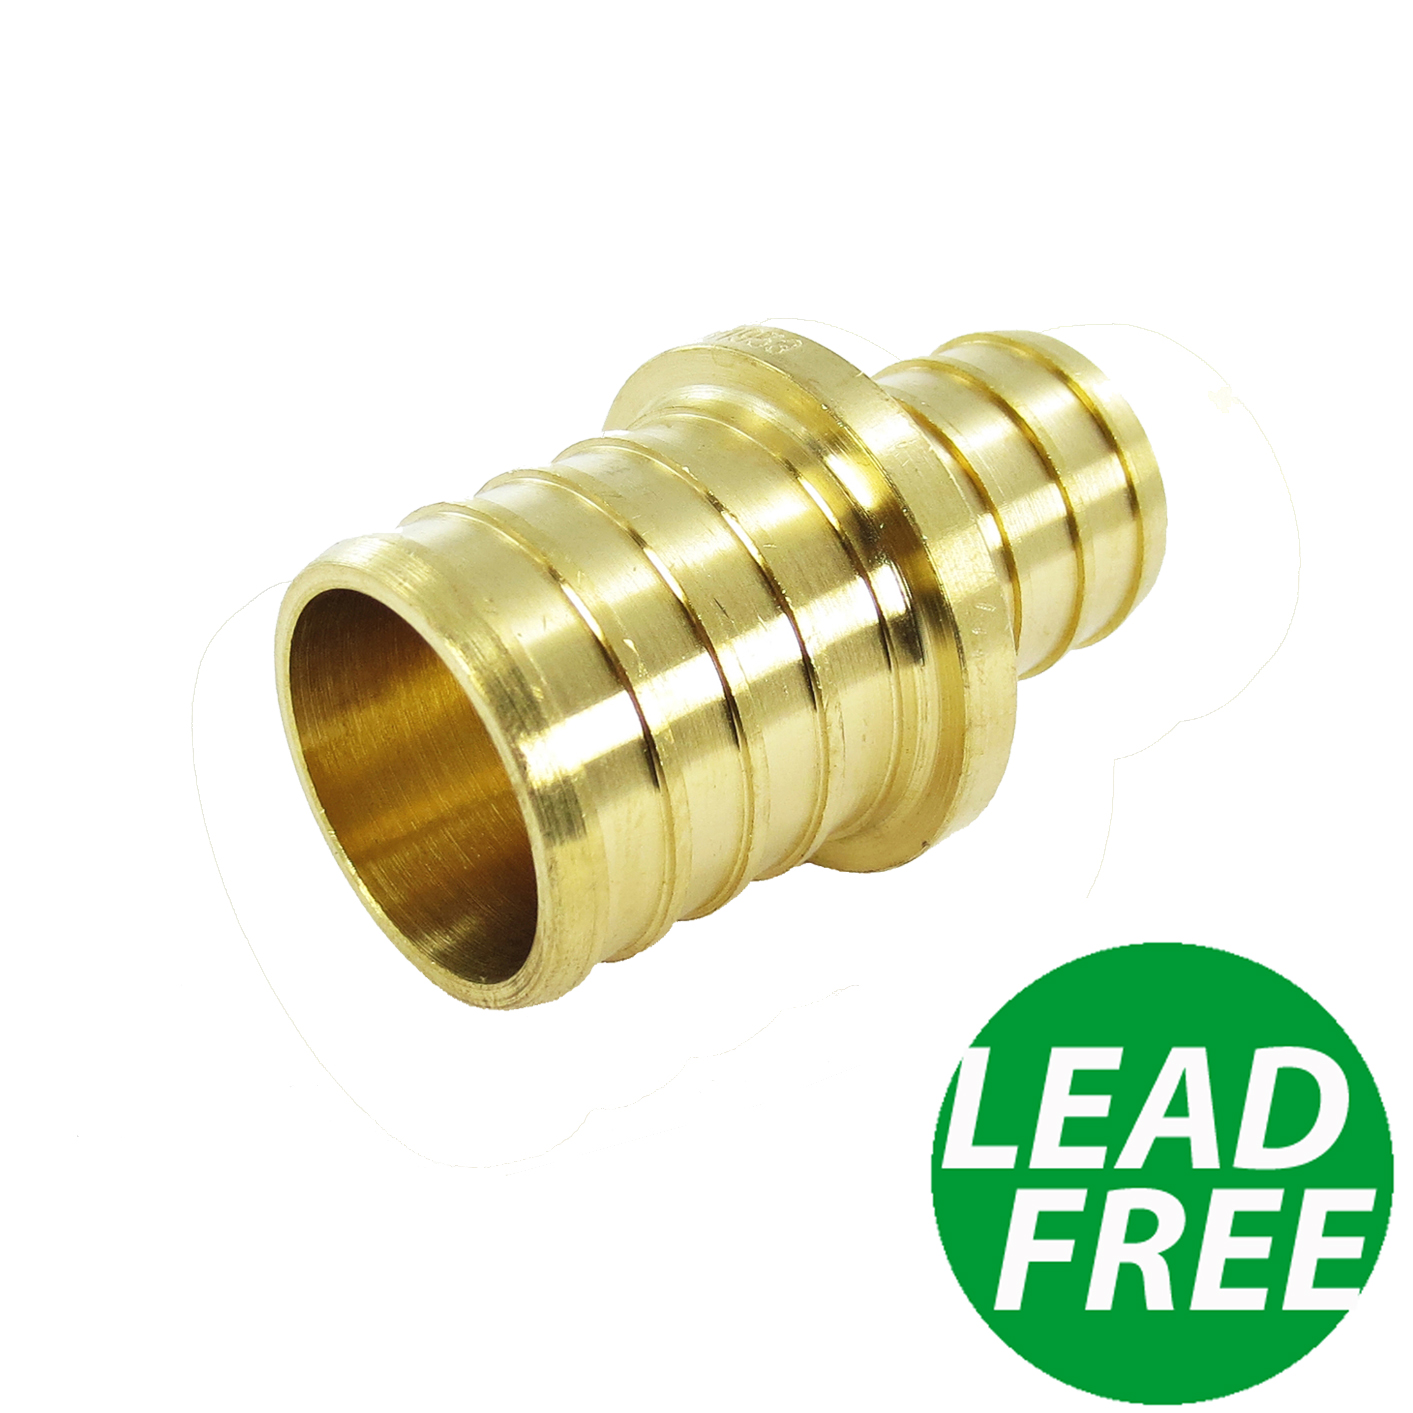 LOT OF 10 3/4" PEX Coupling Brass 3/4 inch crimp Coupler Fitting LEAD FREE 